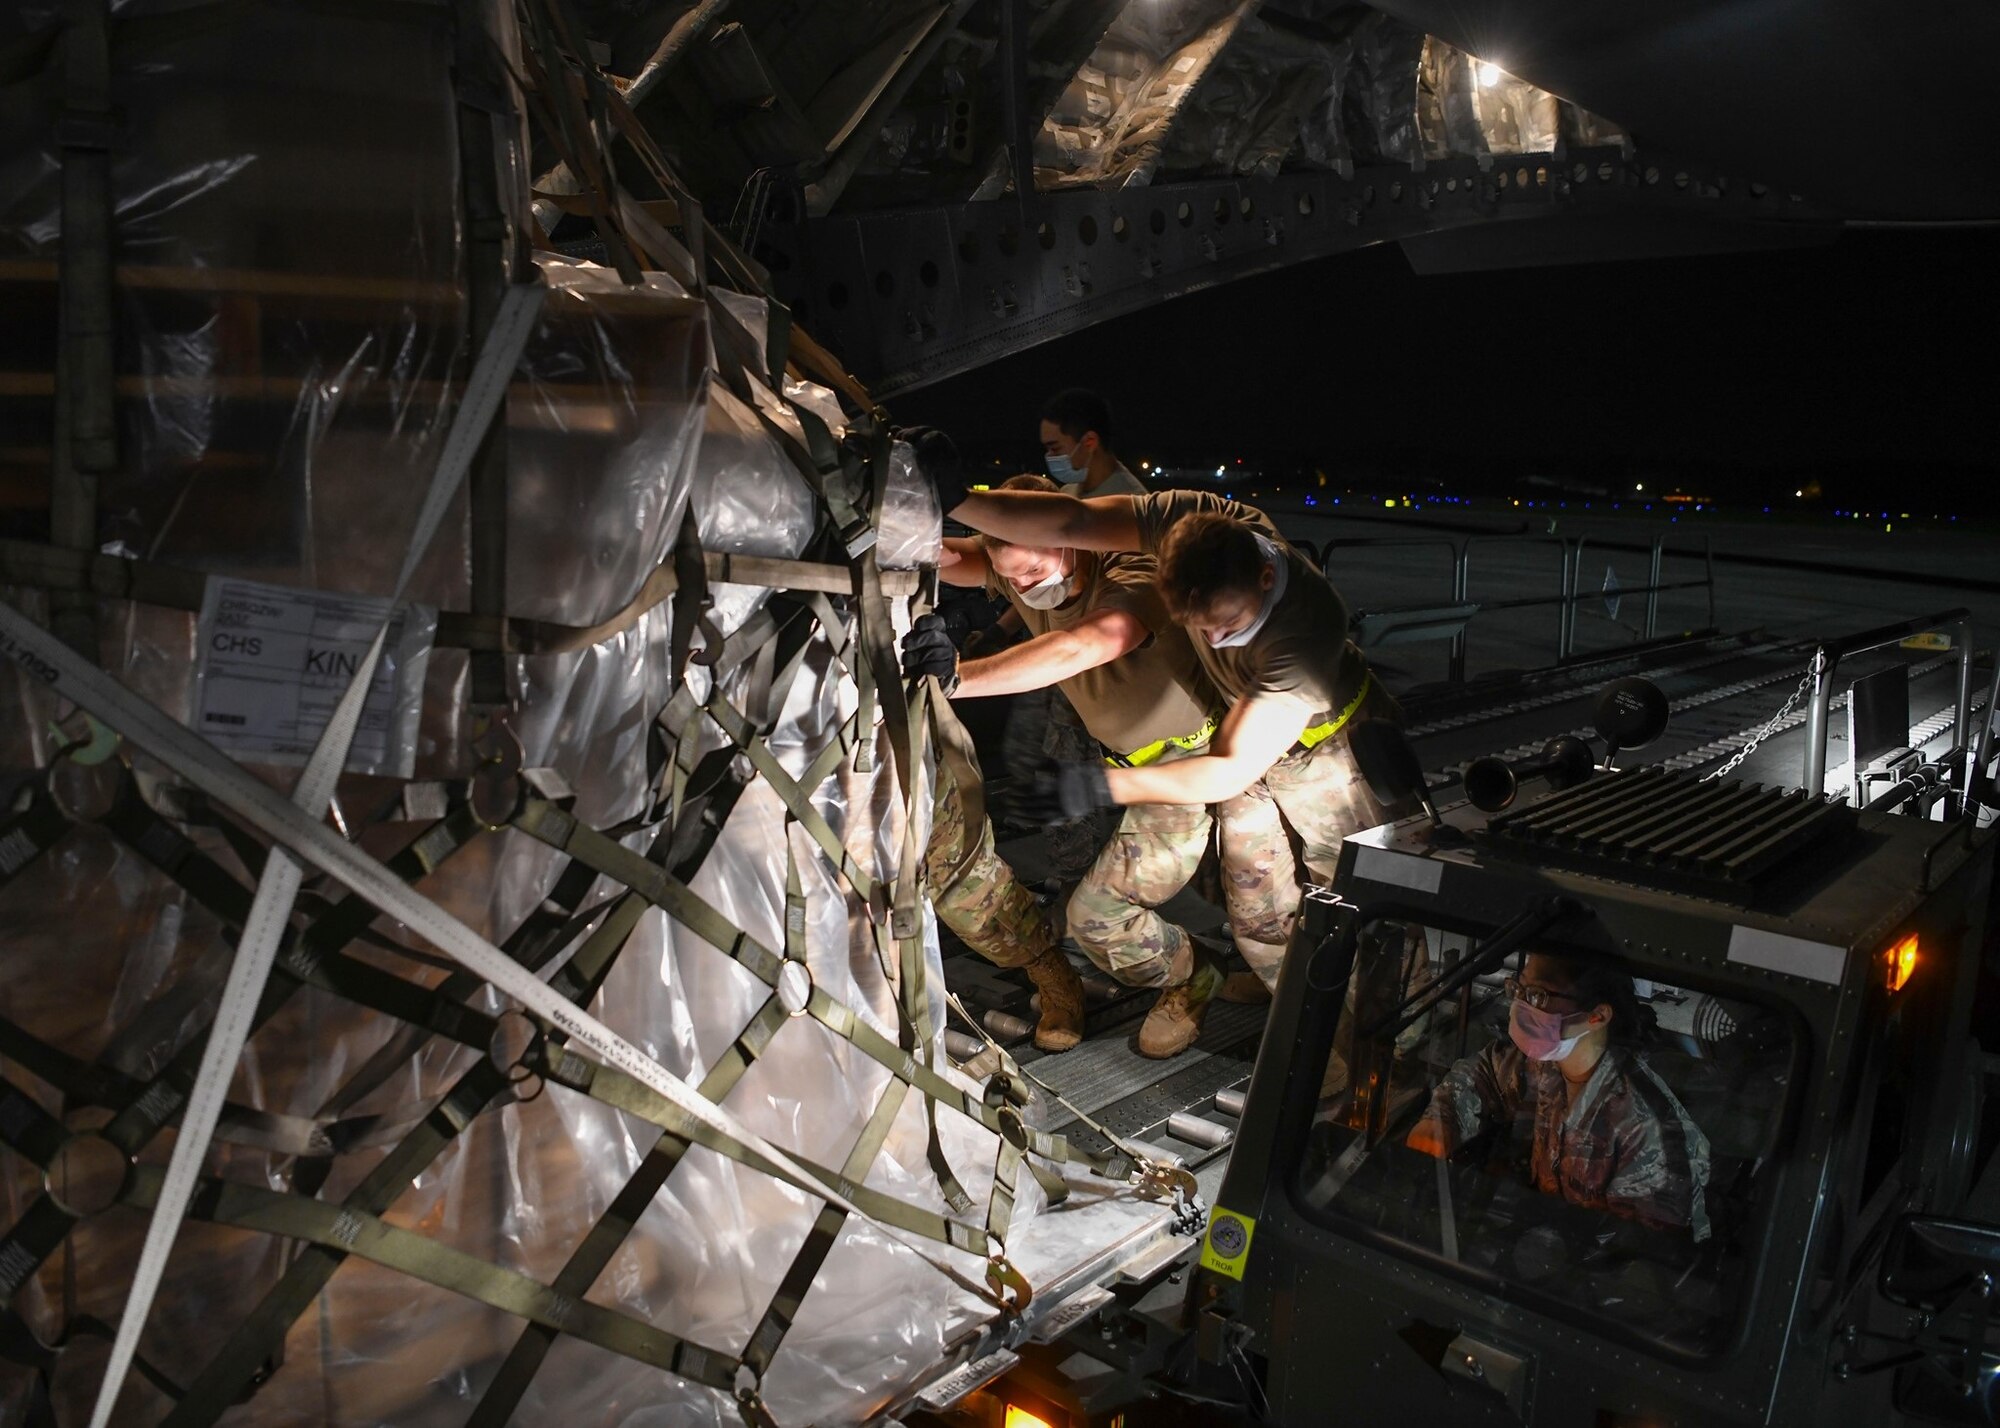 Ramp service technicians assigned to the 437th Aerial Port Squadron load a mobile field hospital onto a C-17 Globemaster III at Joint Base Charleston, S.C., Sept. 19, 2020. Aircrew assigned to the 15th Airlift Squadron transported the large mobile hospital to Kingston, Jamaica, Sept. 19, where it will be used to support the Caribbean nation’s ongoing response to the COVID-19 pandemic. The donation, made on behalf of the American people, cost $753,000 and is part of U.S. Southern Command’s ongoing assistance to nations responding to the global pandemic in the Caribbean and Latin America funded by the command’s Humanitarian Assistance Program (HAP). The command has also delivered mobile field hospitals to Costa Rica and the Dominican Republic and, in total, will donate 24 field hospitals to 11 countries. (Photo by Staff Sergeant Lance Valencia)